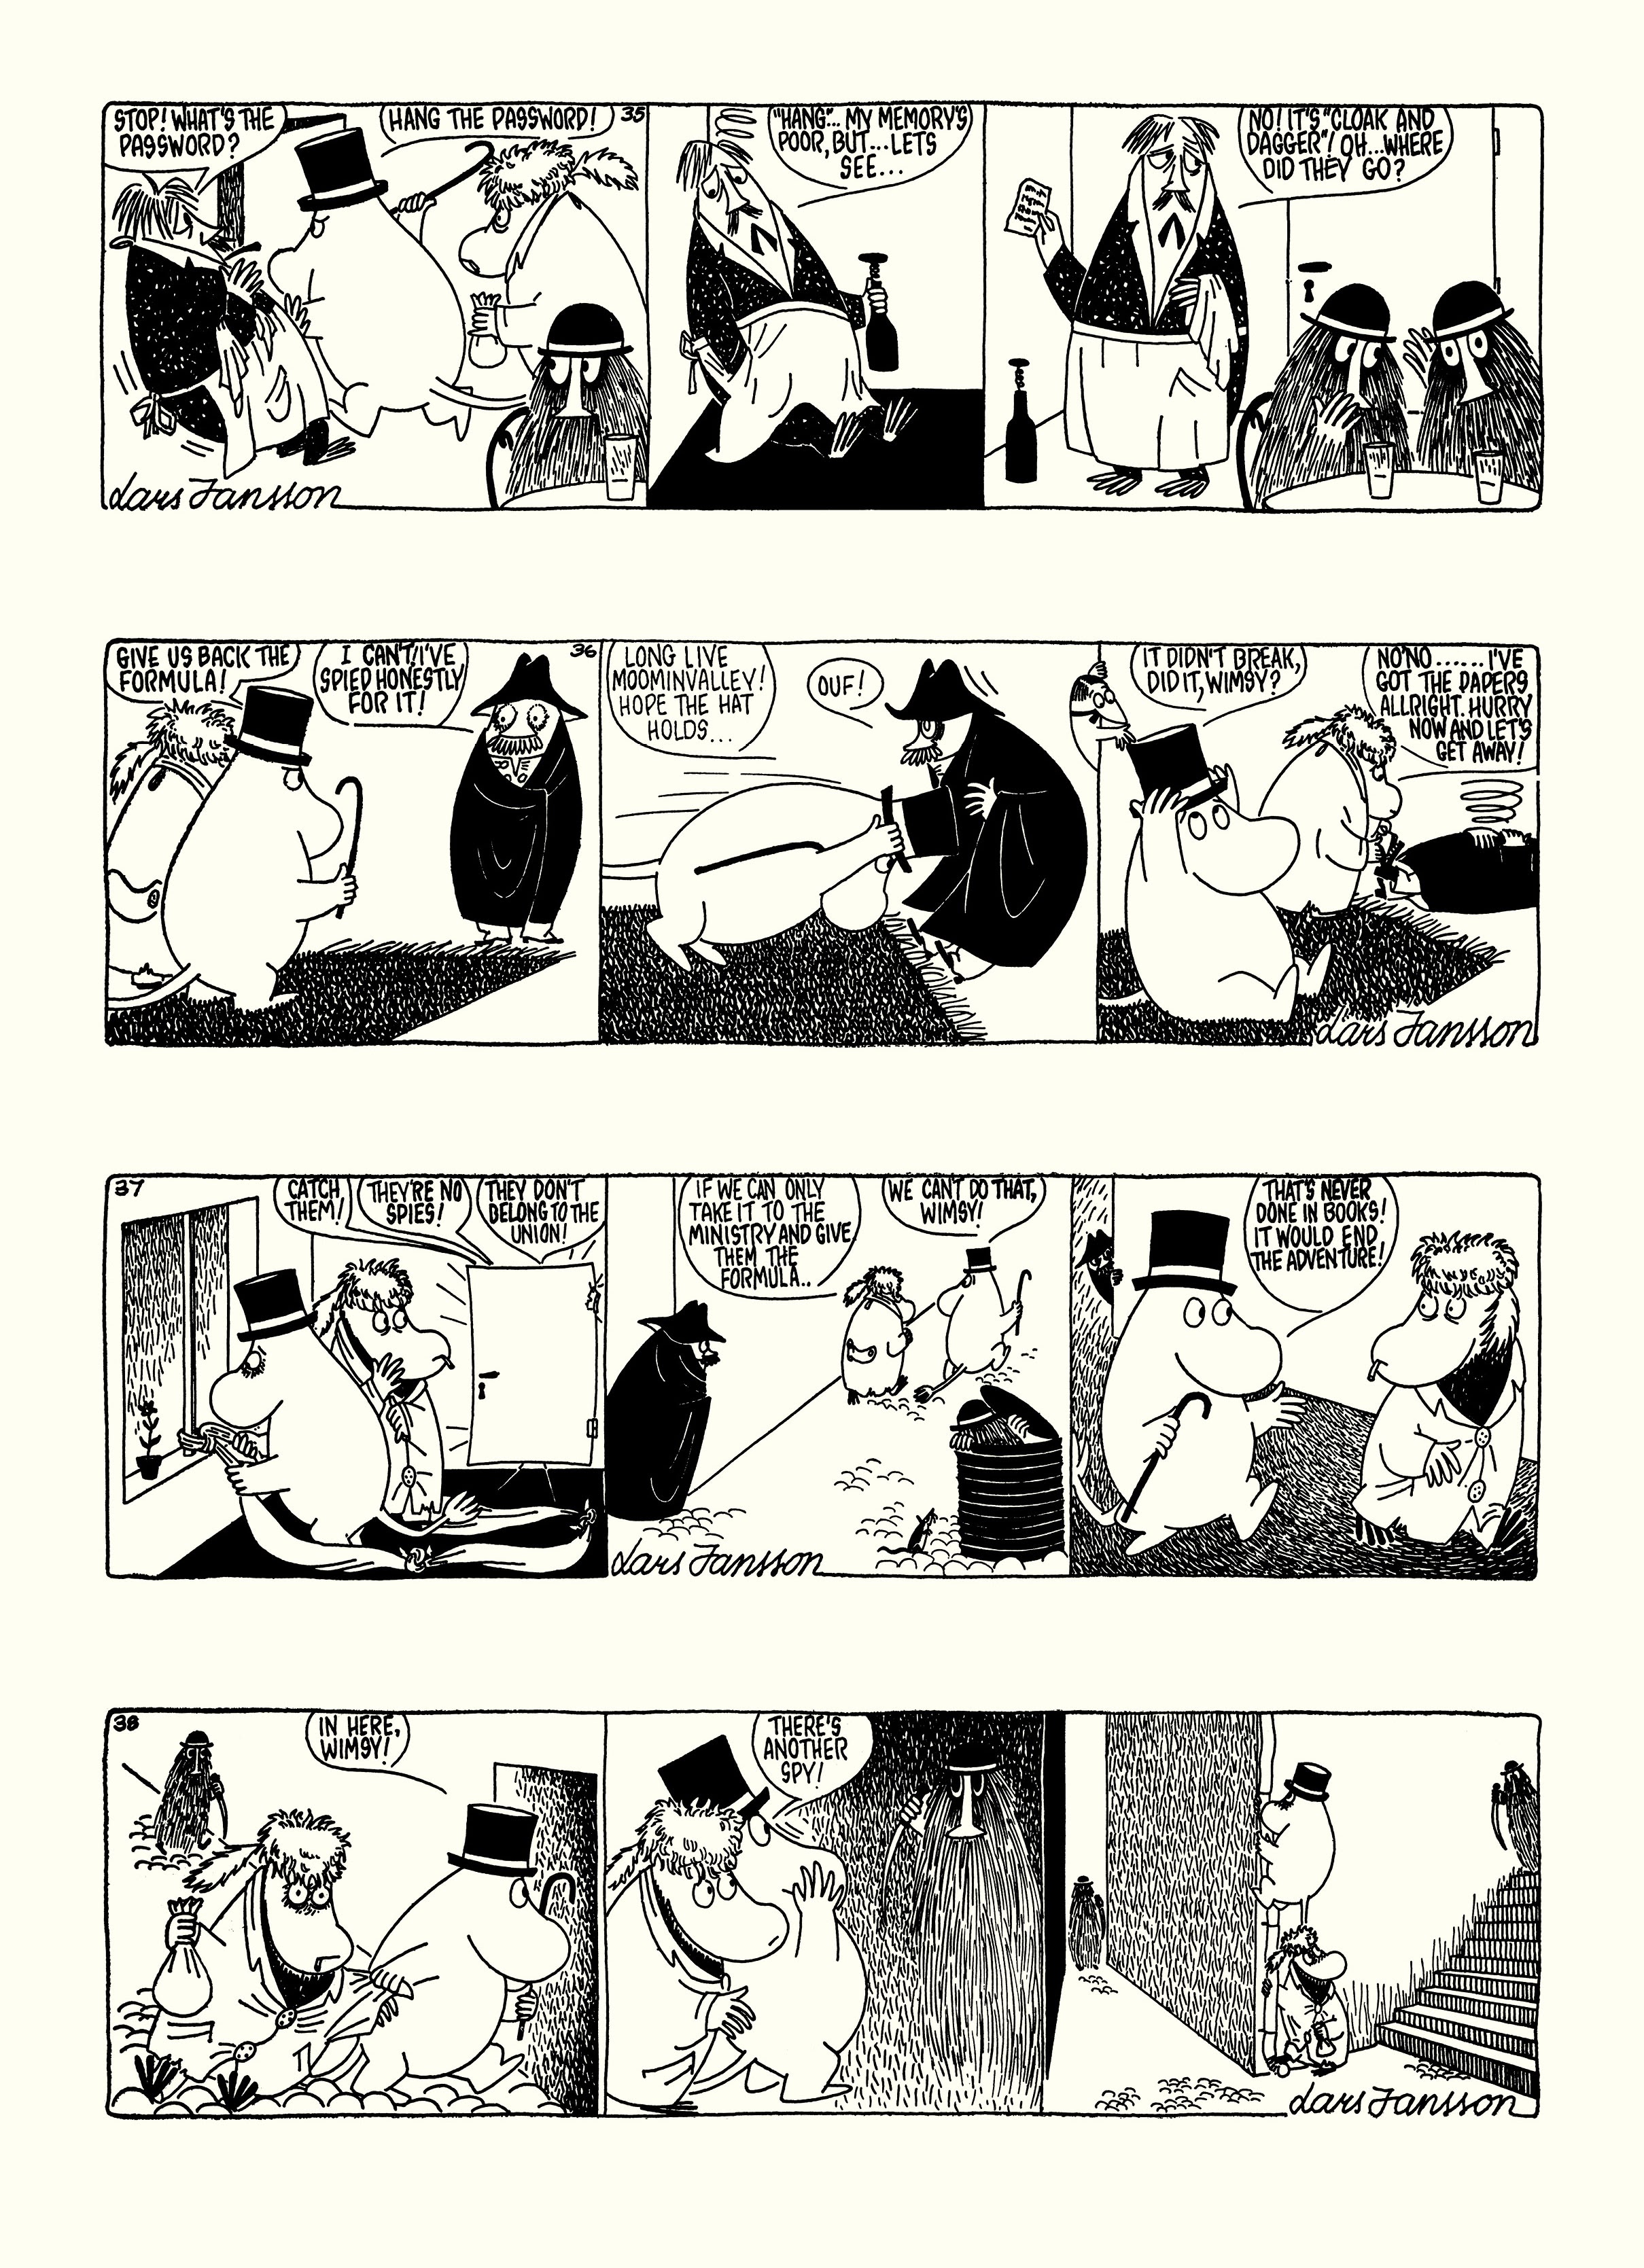 Read online Moomin: The Complete Lars Jansson Comic Strip comic -  Issue # TPB 6 - 56